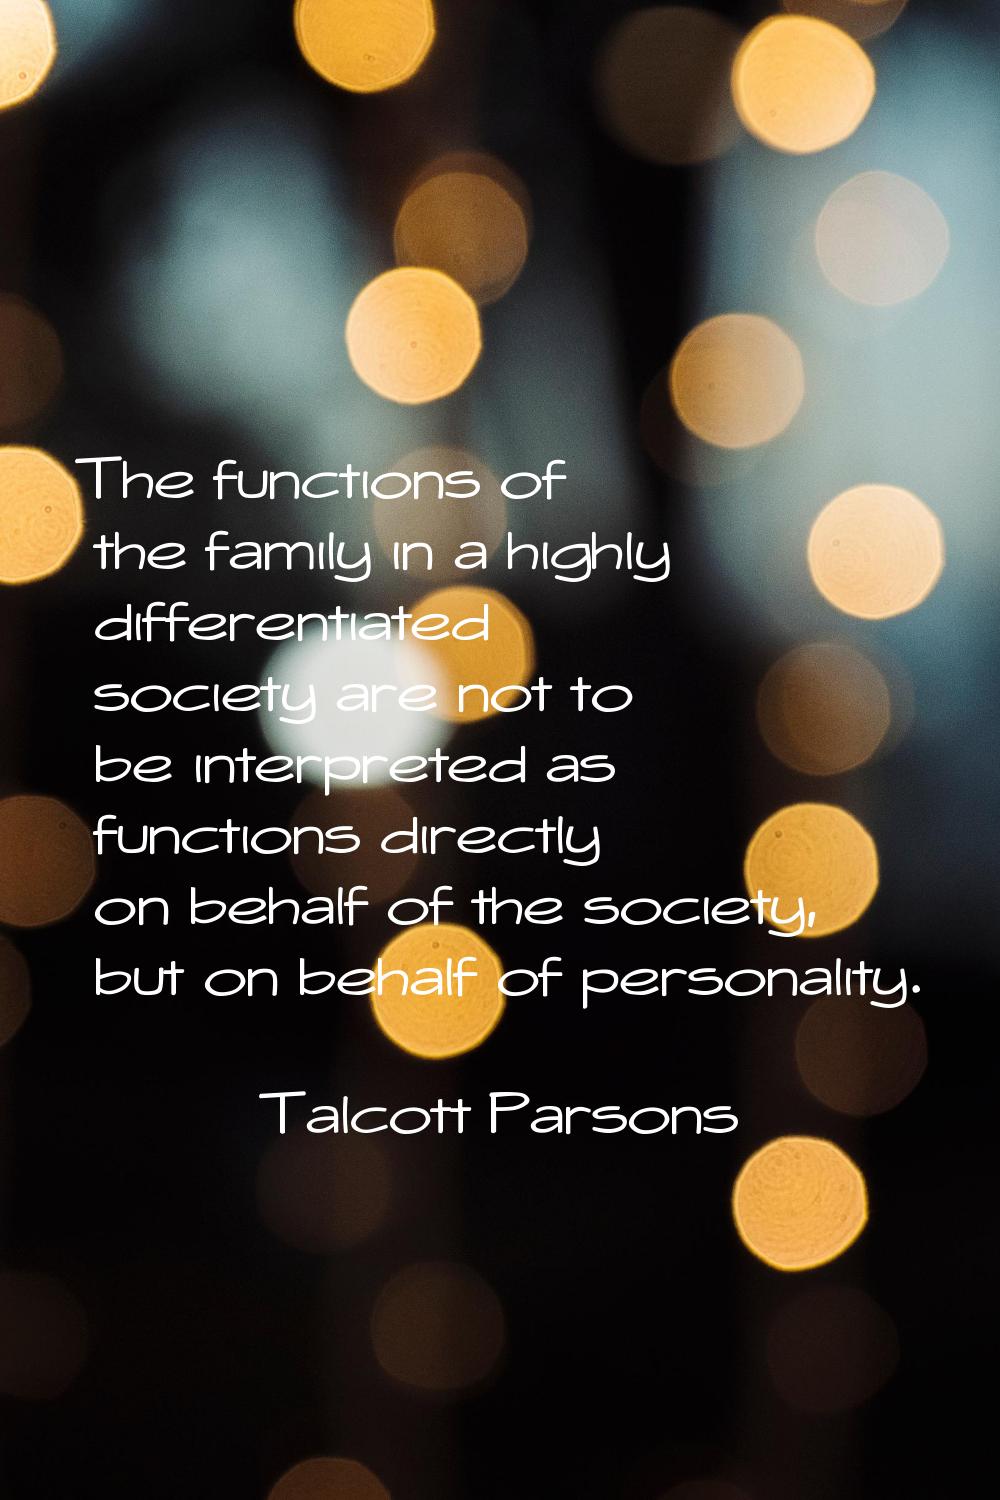 The functions of the family in a highly differentiated society are not to be interpreted as functio